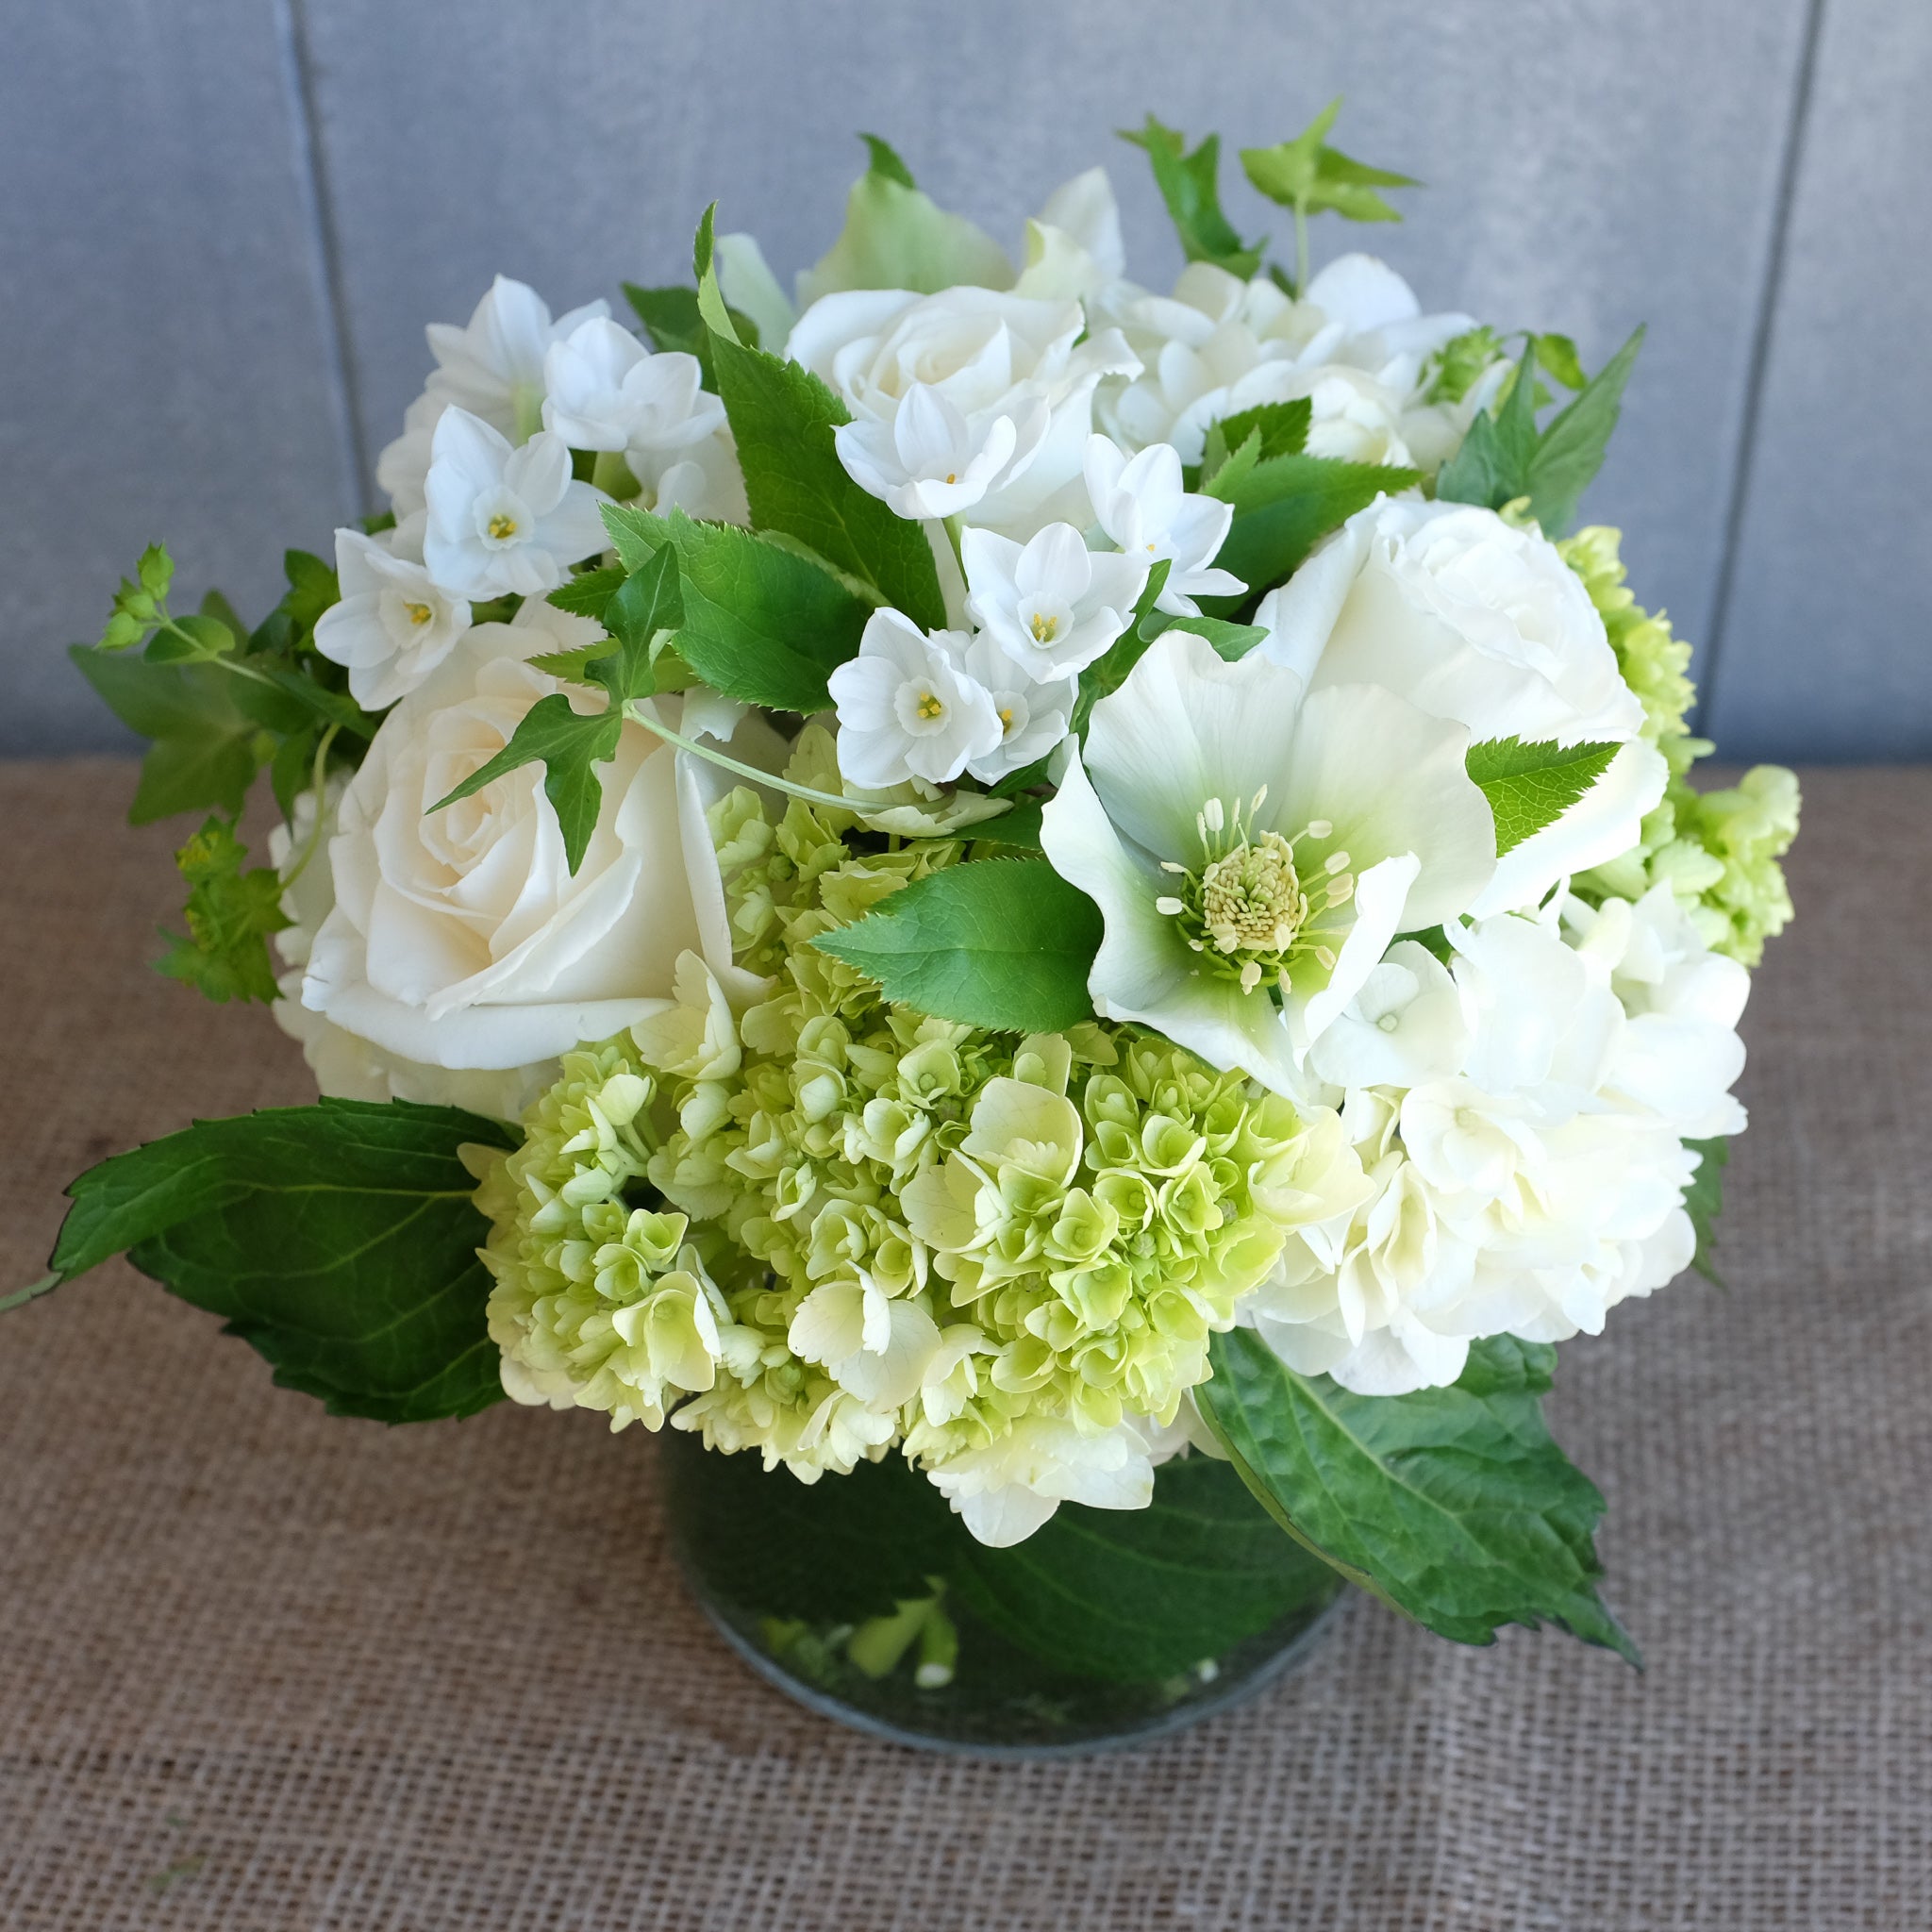 Spring Bouquet of white and green flowers by Michler's Florist.